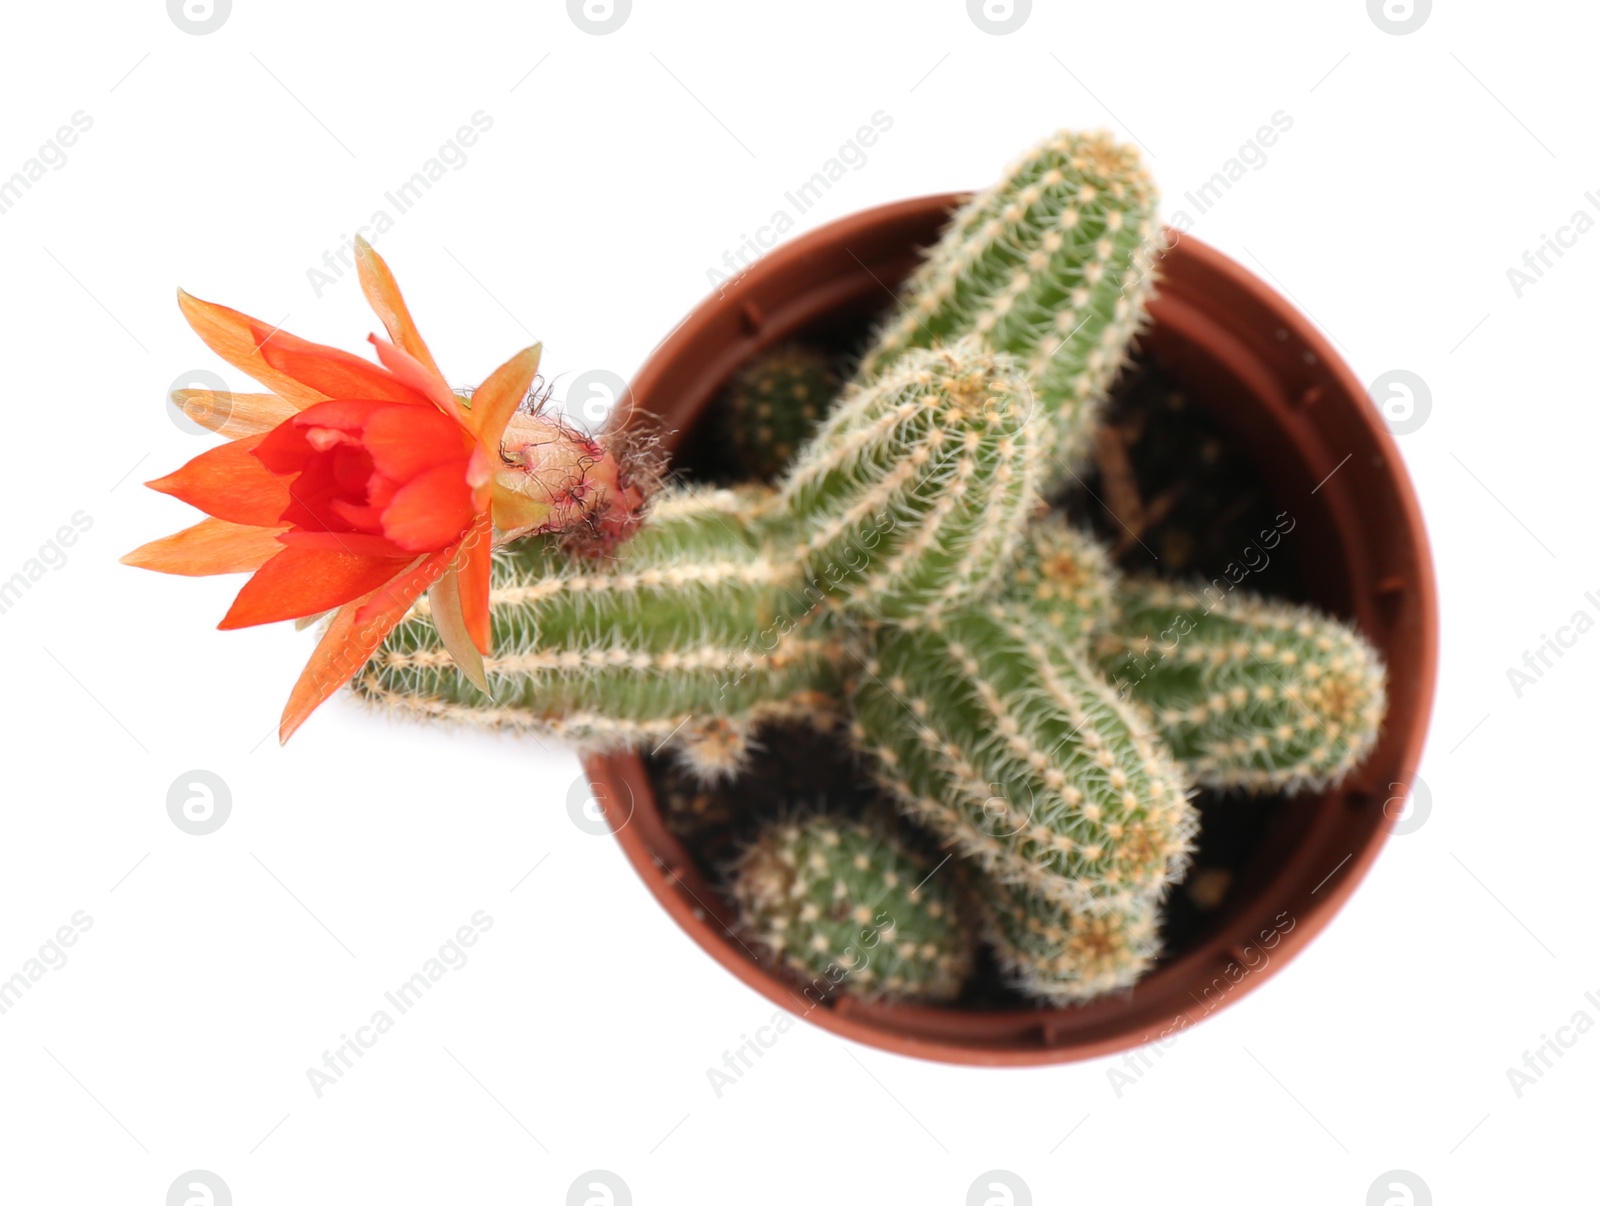 Photo of Cactus (Echinopsis chamaecereus) with beautiful red flower in pot on white background, top view